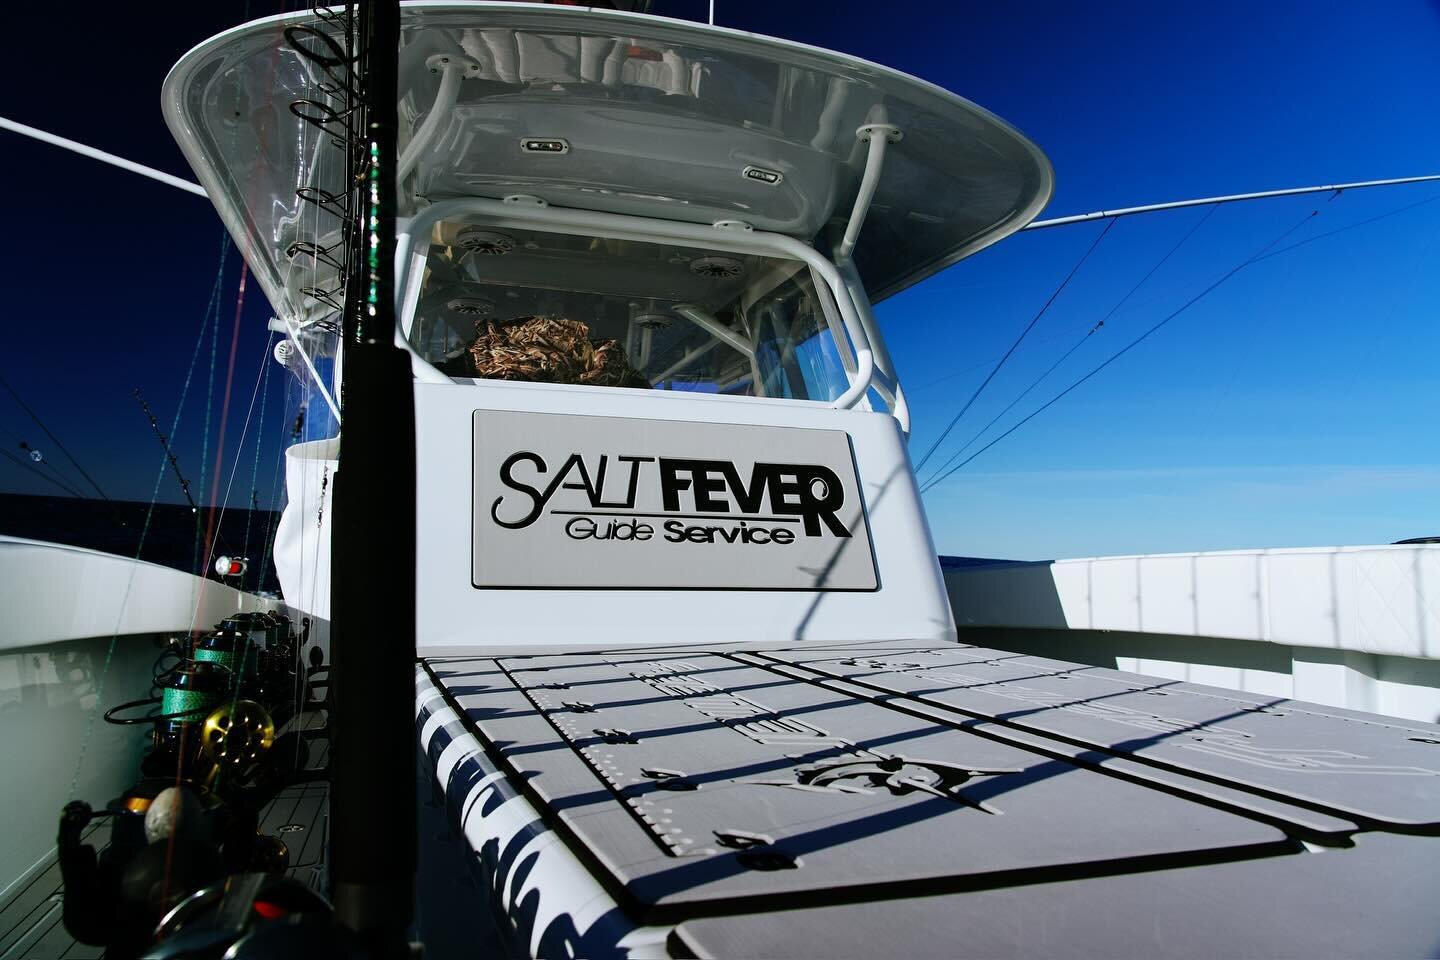 Tuesday, March 12th is looking beautiful! Give us a call! Spring fishing is upon us!! 
.
.
.
@SaltFeverGuideService&mdash;&gt; 910.250.3021
.
.
LIKE OUR PAGE TO FOLLOW THE SQUAD
🇺🇸🐟🇺🇸🐟🇺🇸🐟🇺🇸🐟🇺🇸🐟🇺🇸🐟🇺🇸🐟
.
@AmericanAquatic
.
.
| #Sal